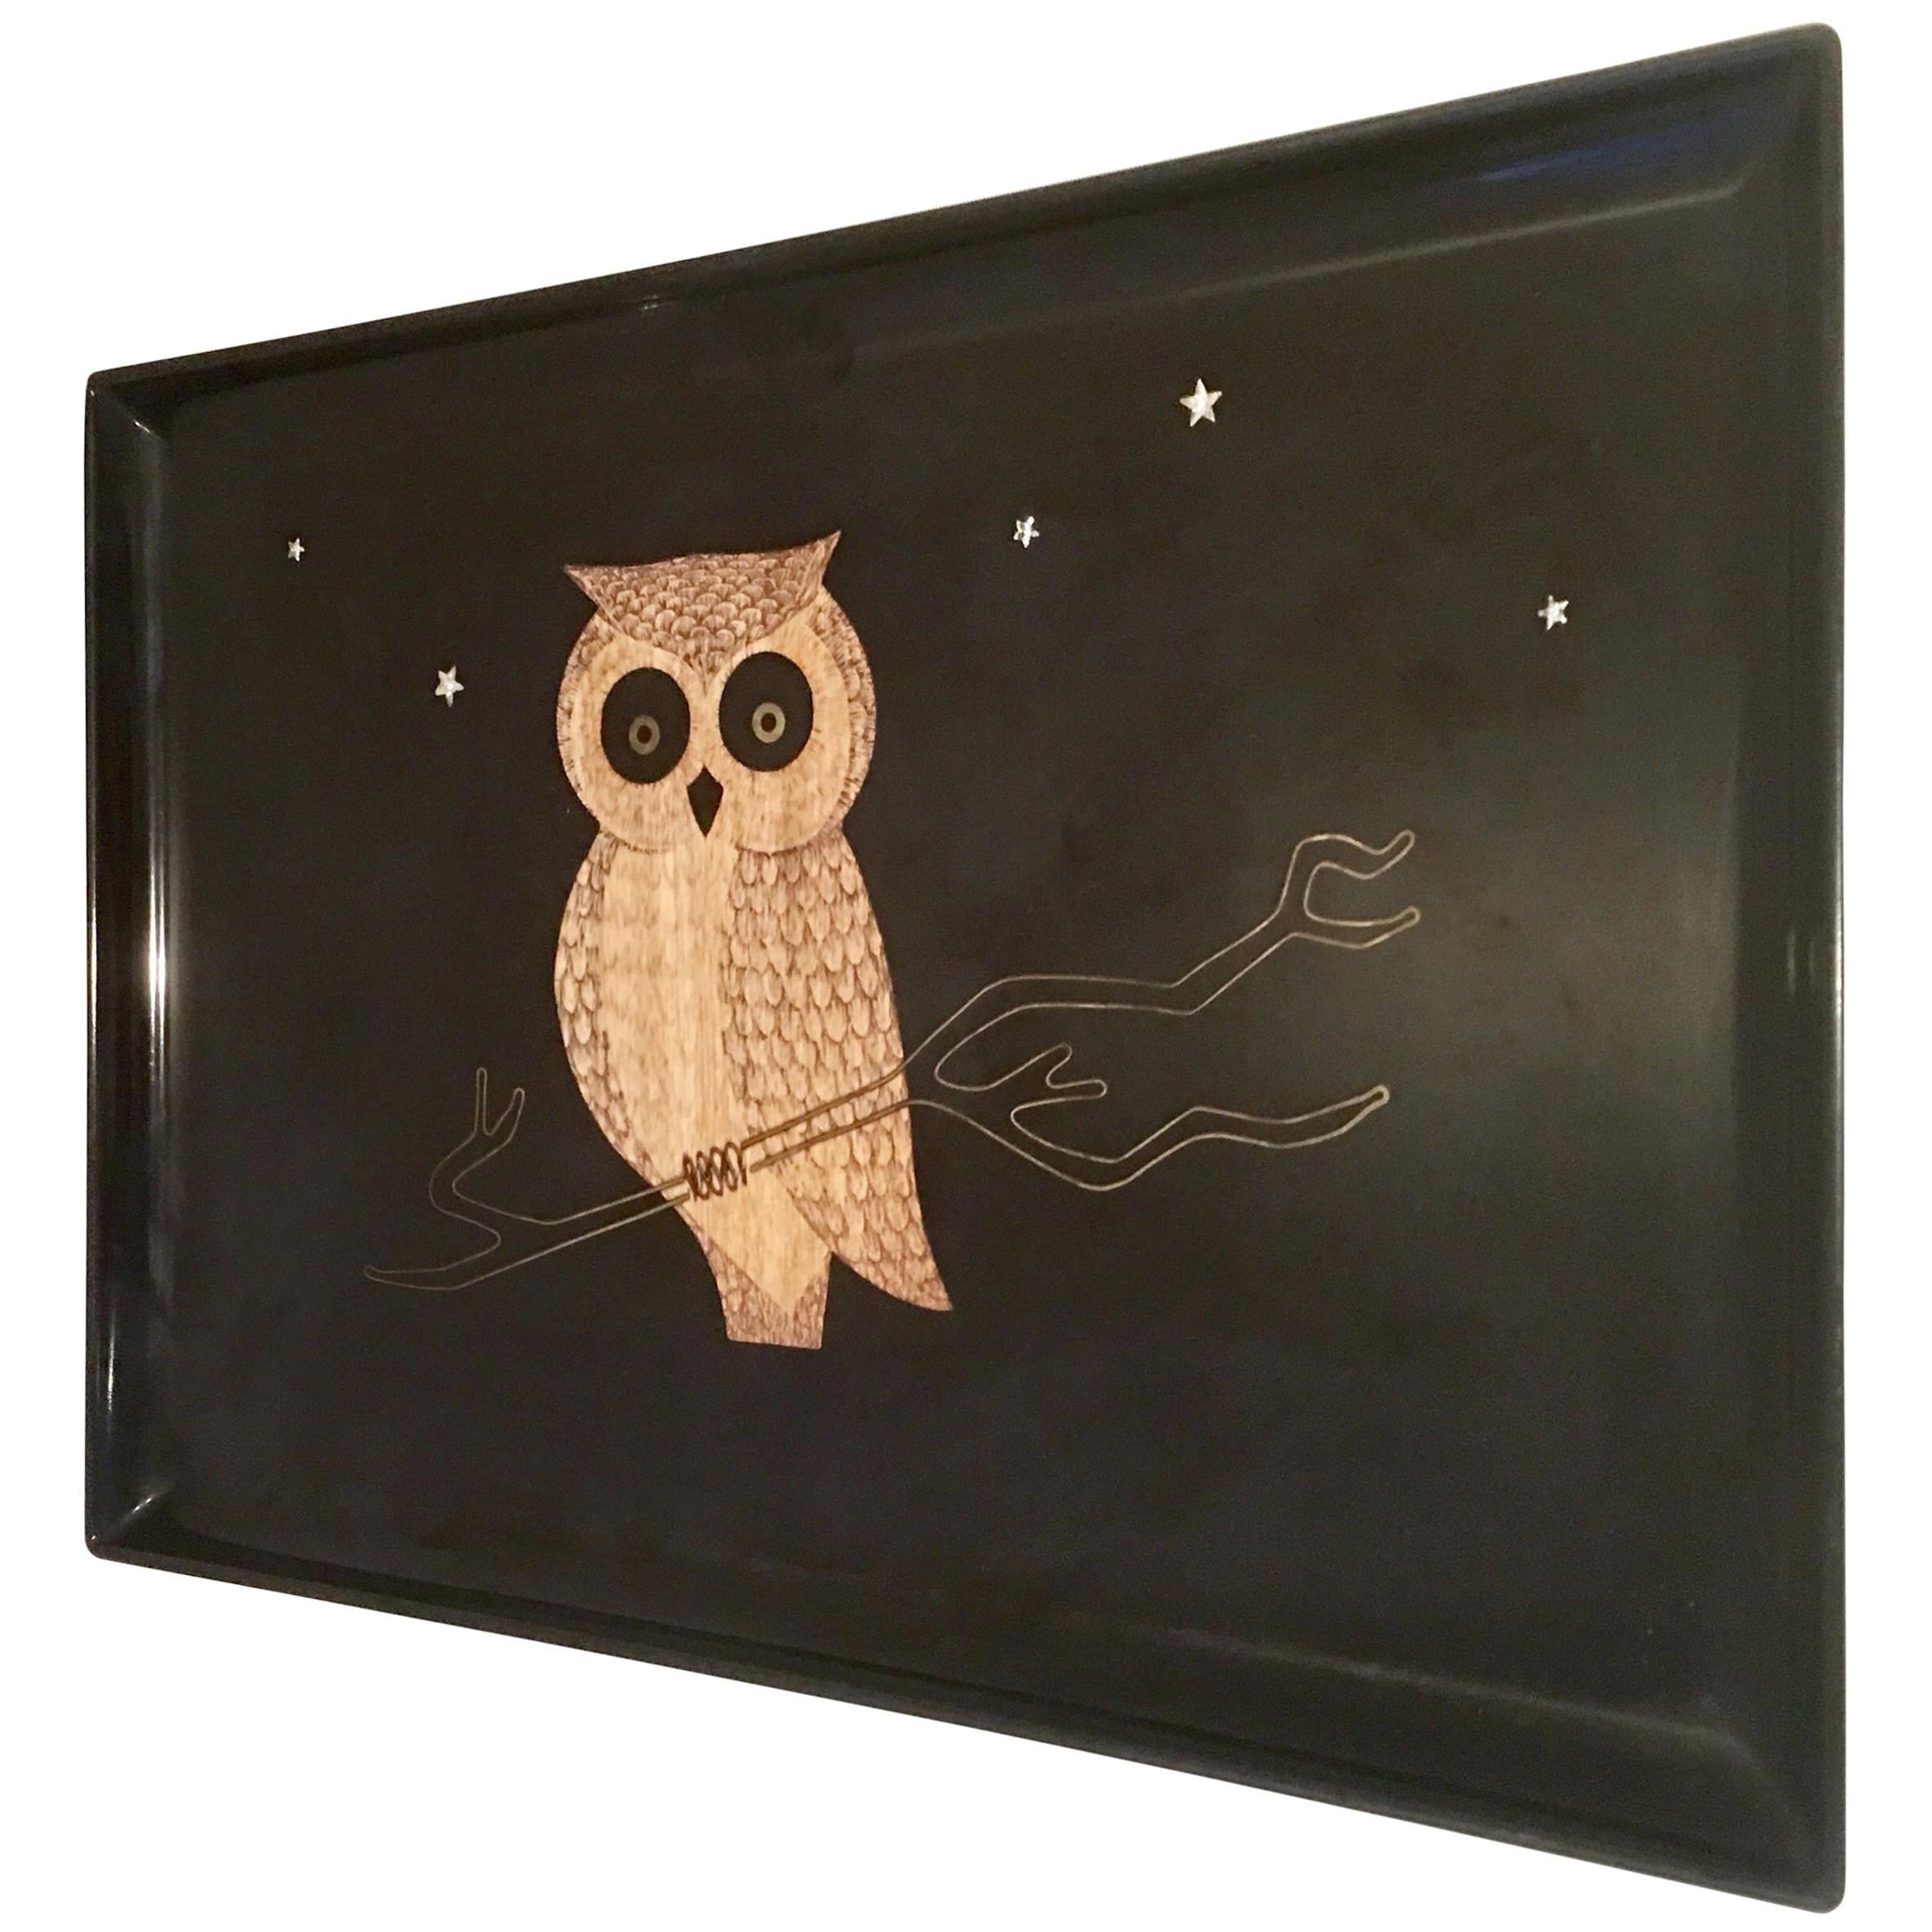 20th Century Lacquer and Inlay "Owl" Tray by Couroc